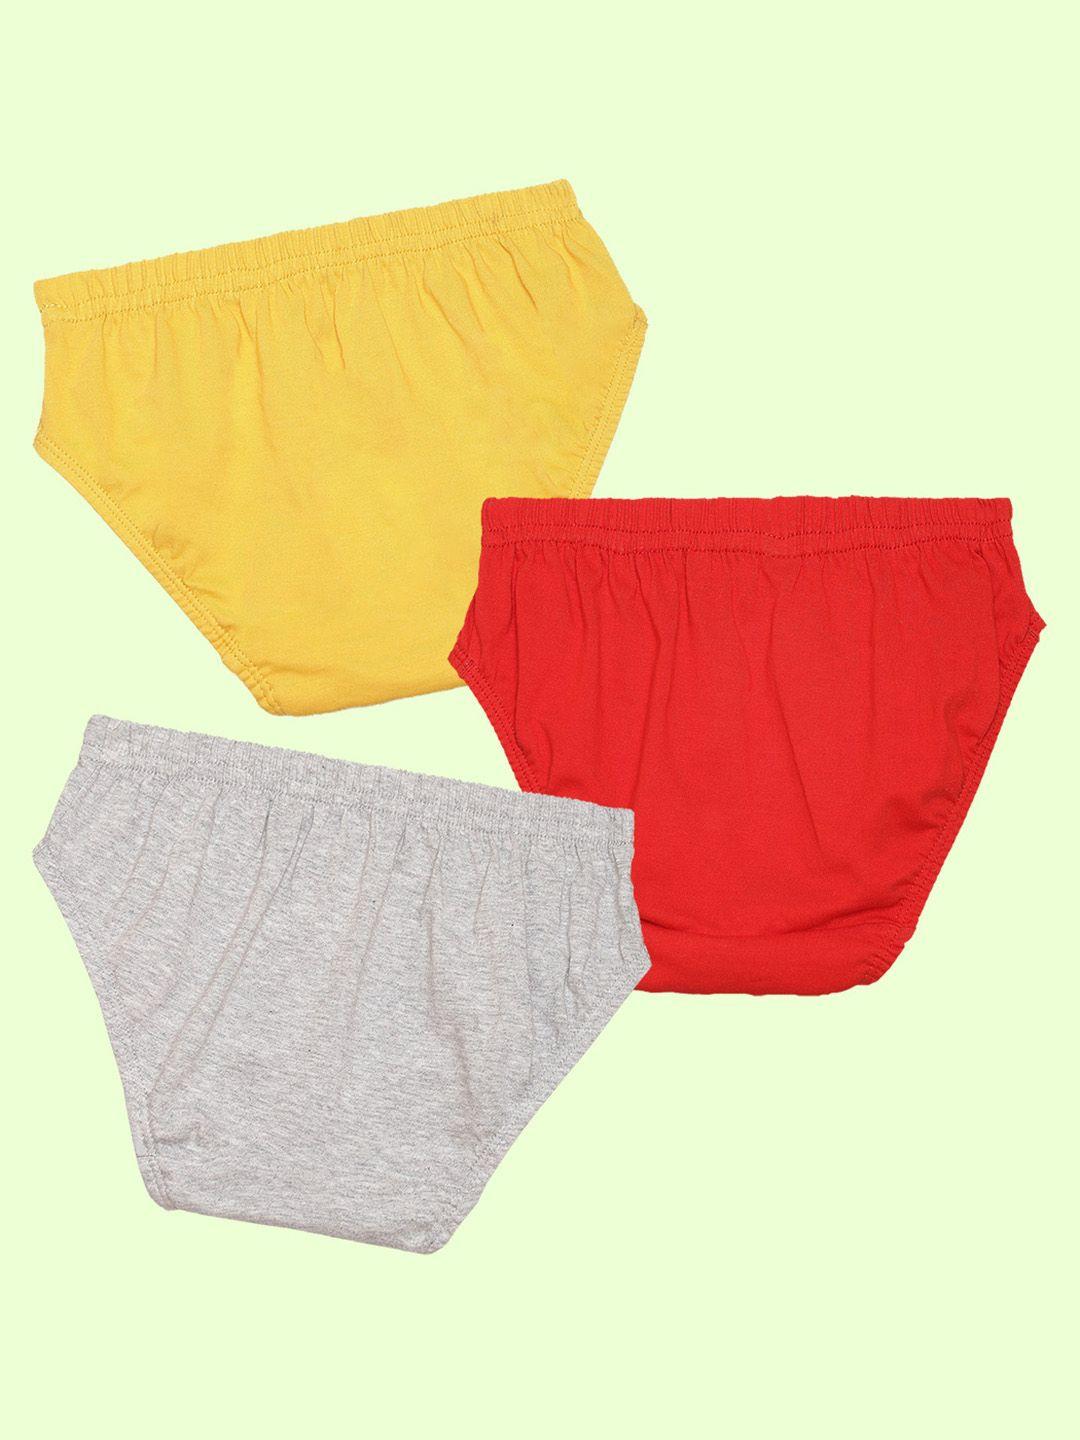 nusyl-boys-pack-of-3-pure-cotton-basic-briefs